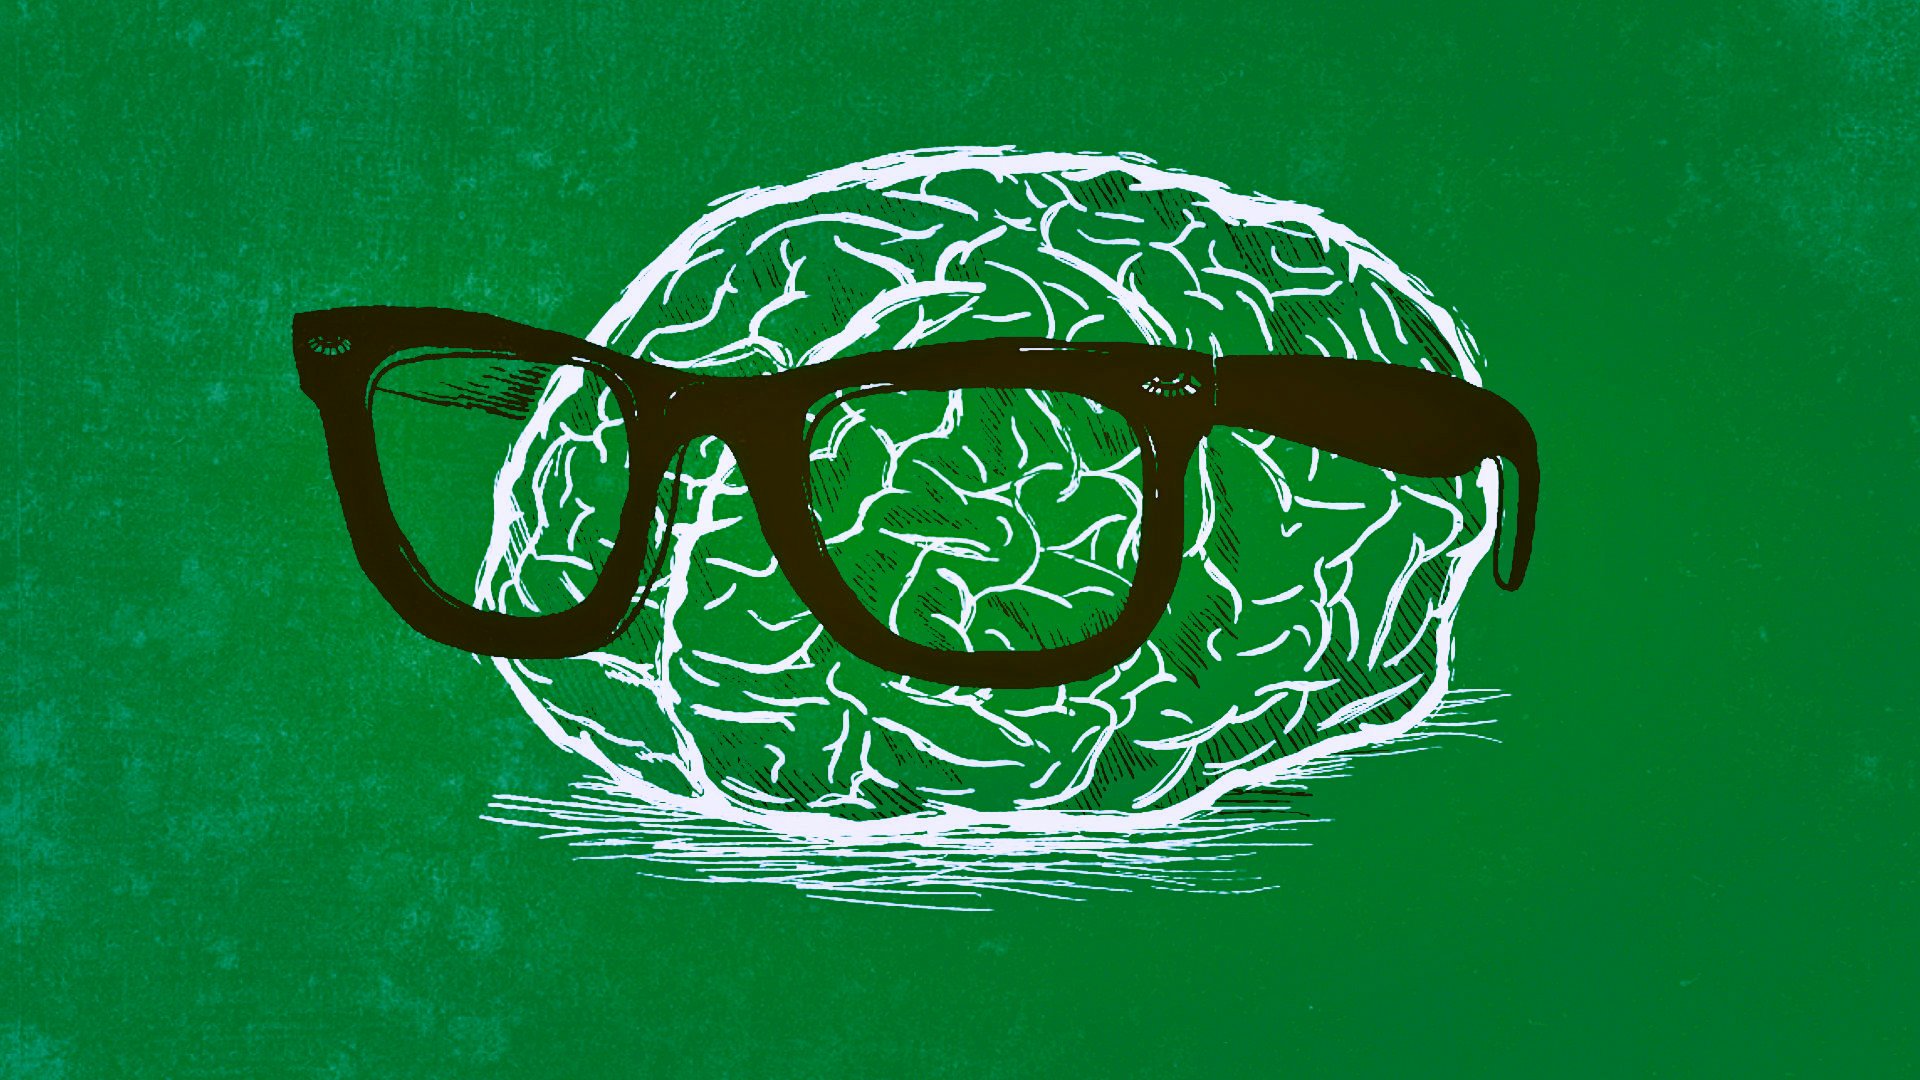 Nerd Brain Green Color by TheAWPMaster